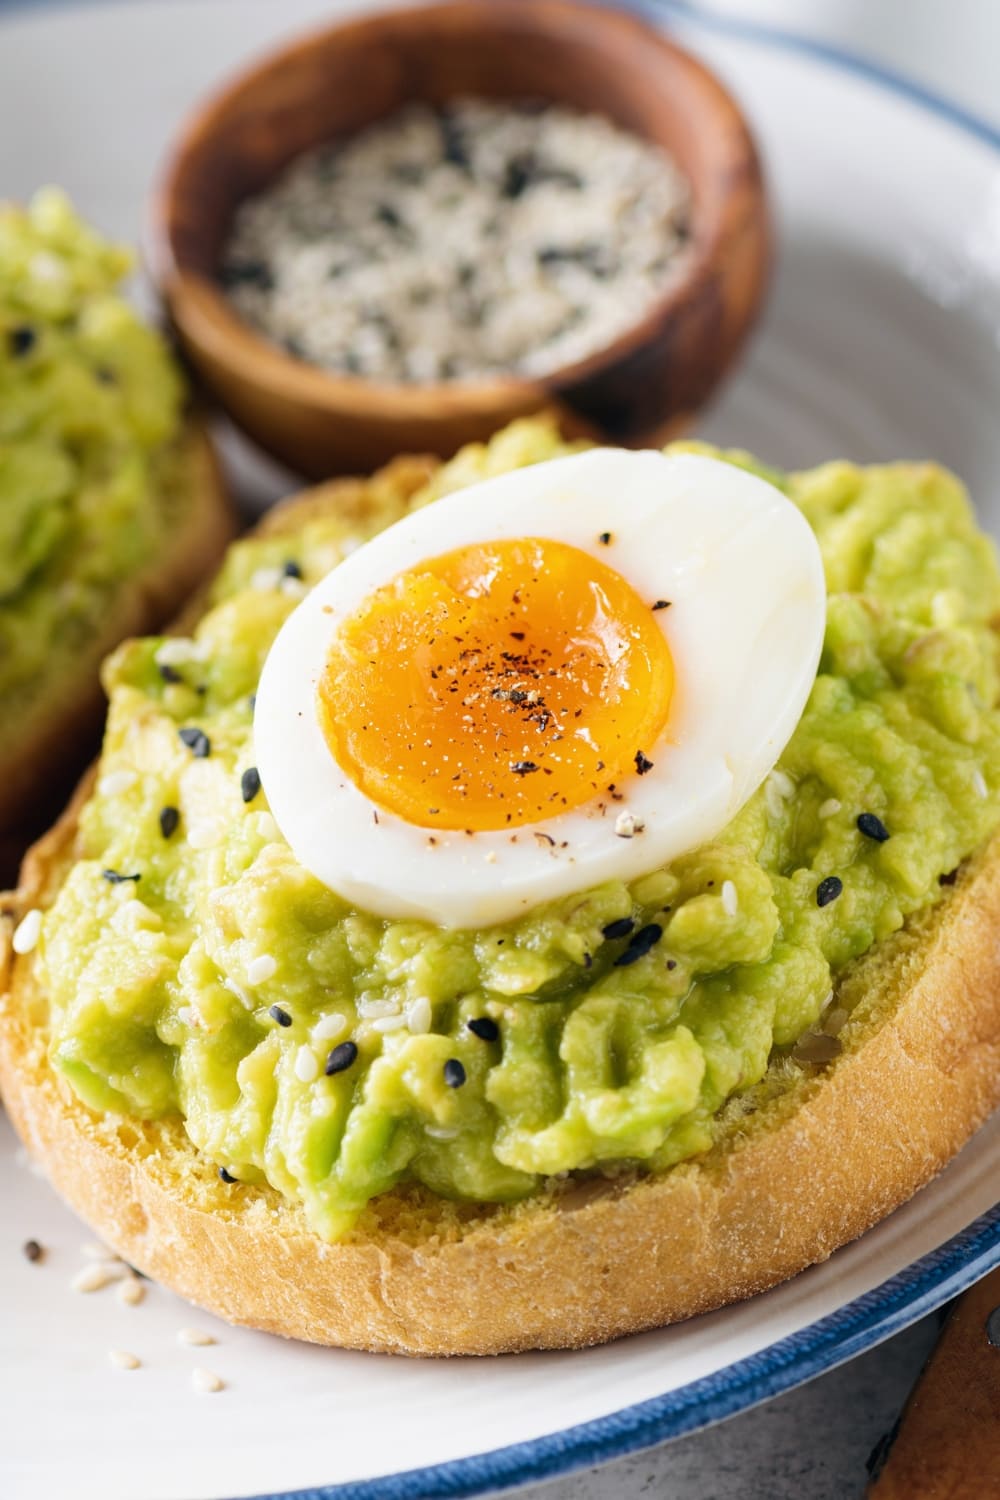 Avocado Toast with Spread and Slice of Boiled Egg, Sprinkled With Sesame Seeds